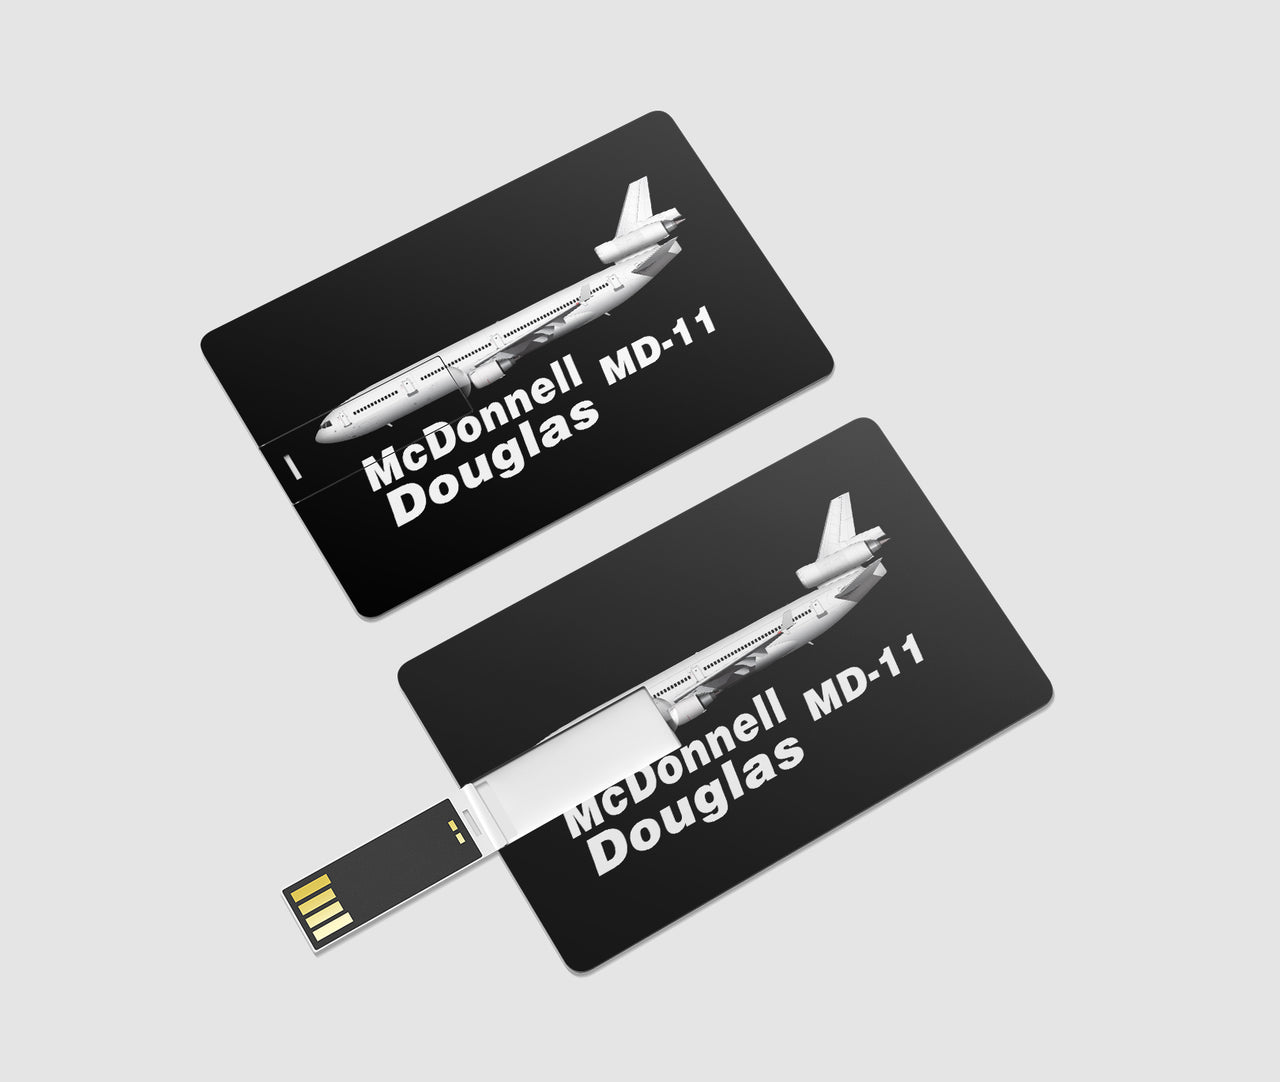 The McDonnell Douglas MD-11 Designed USB Cards